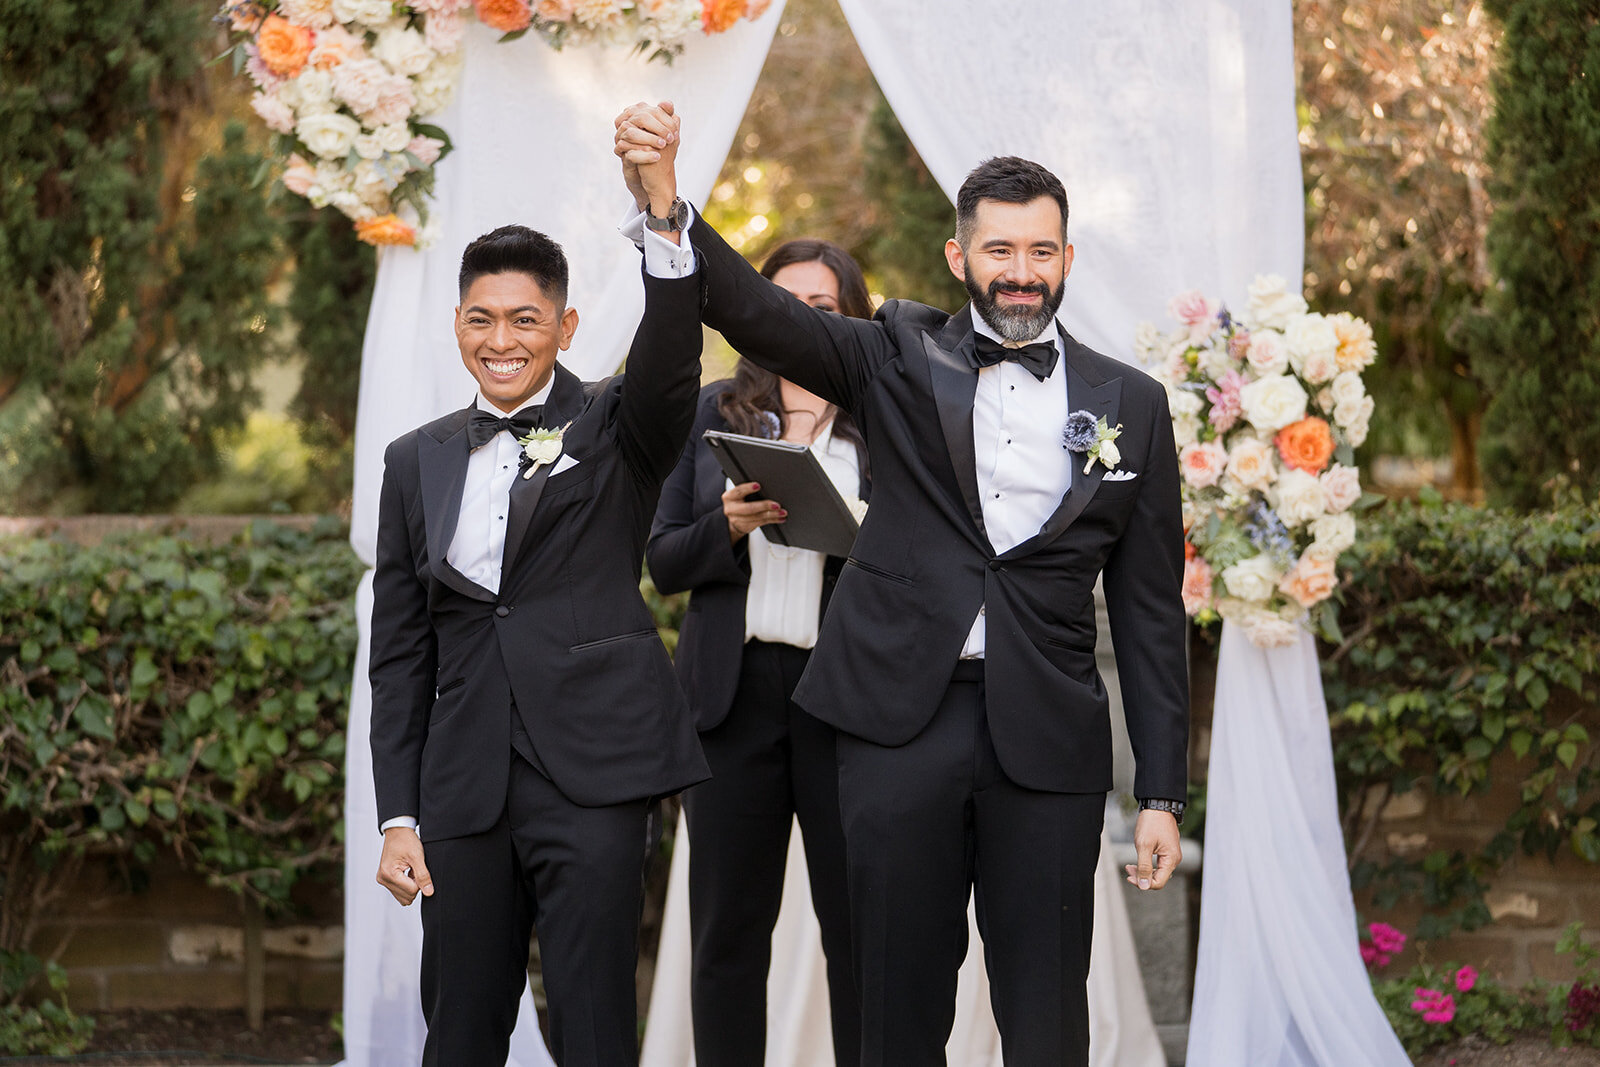 Groom and groom holding hands in the air and facing their guests after being announced they are married